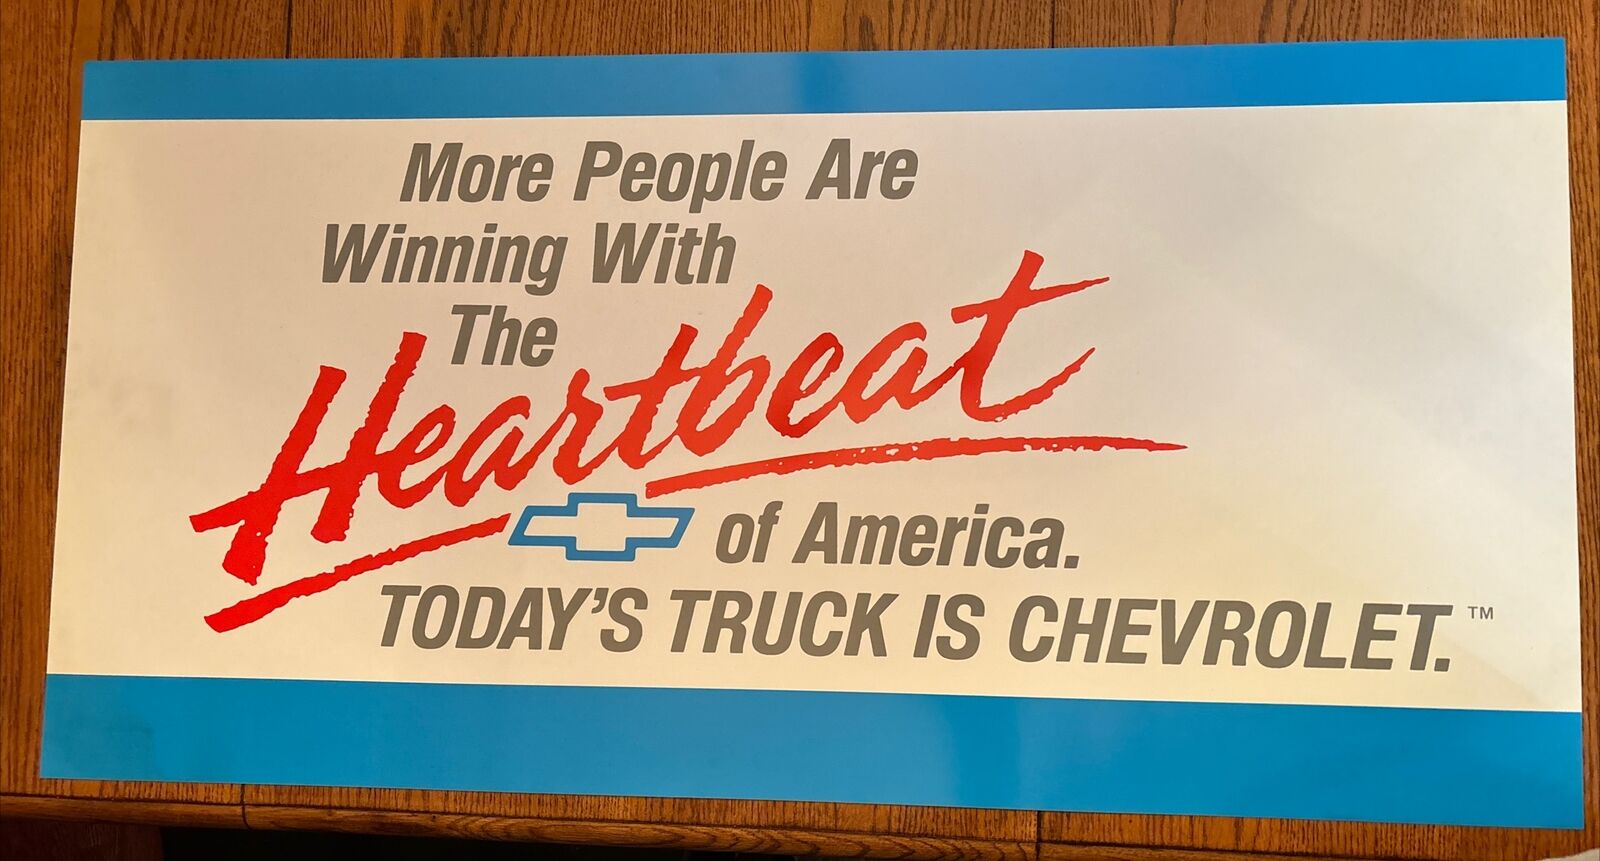 The Heartbeat Of America Today’s Truck Is Chevrolet Dealership Poster 34 x 17